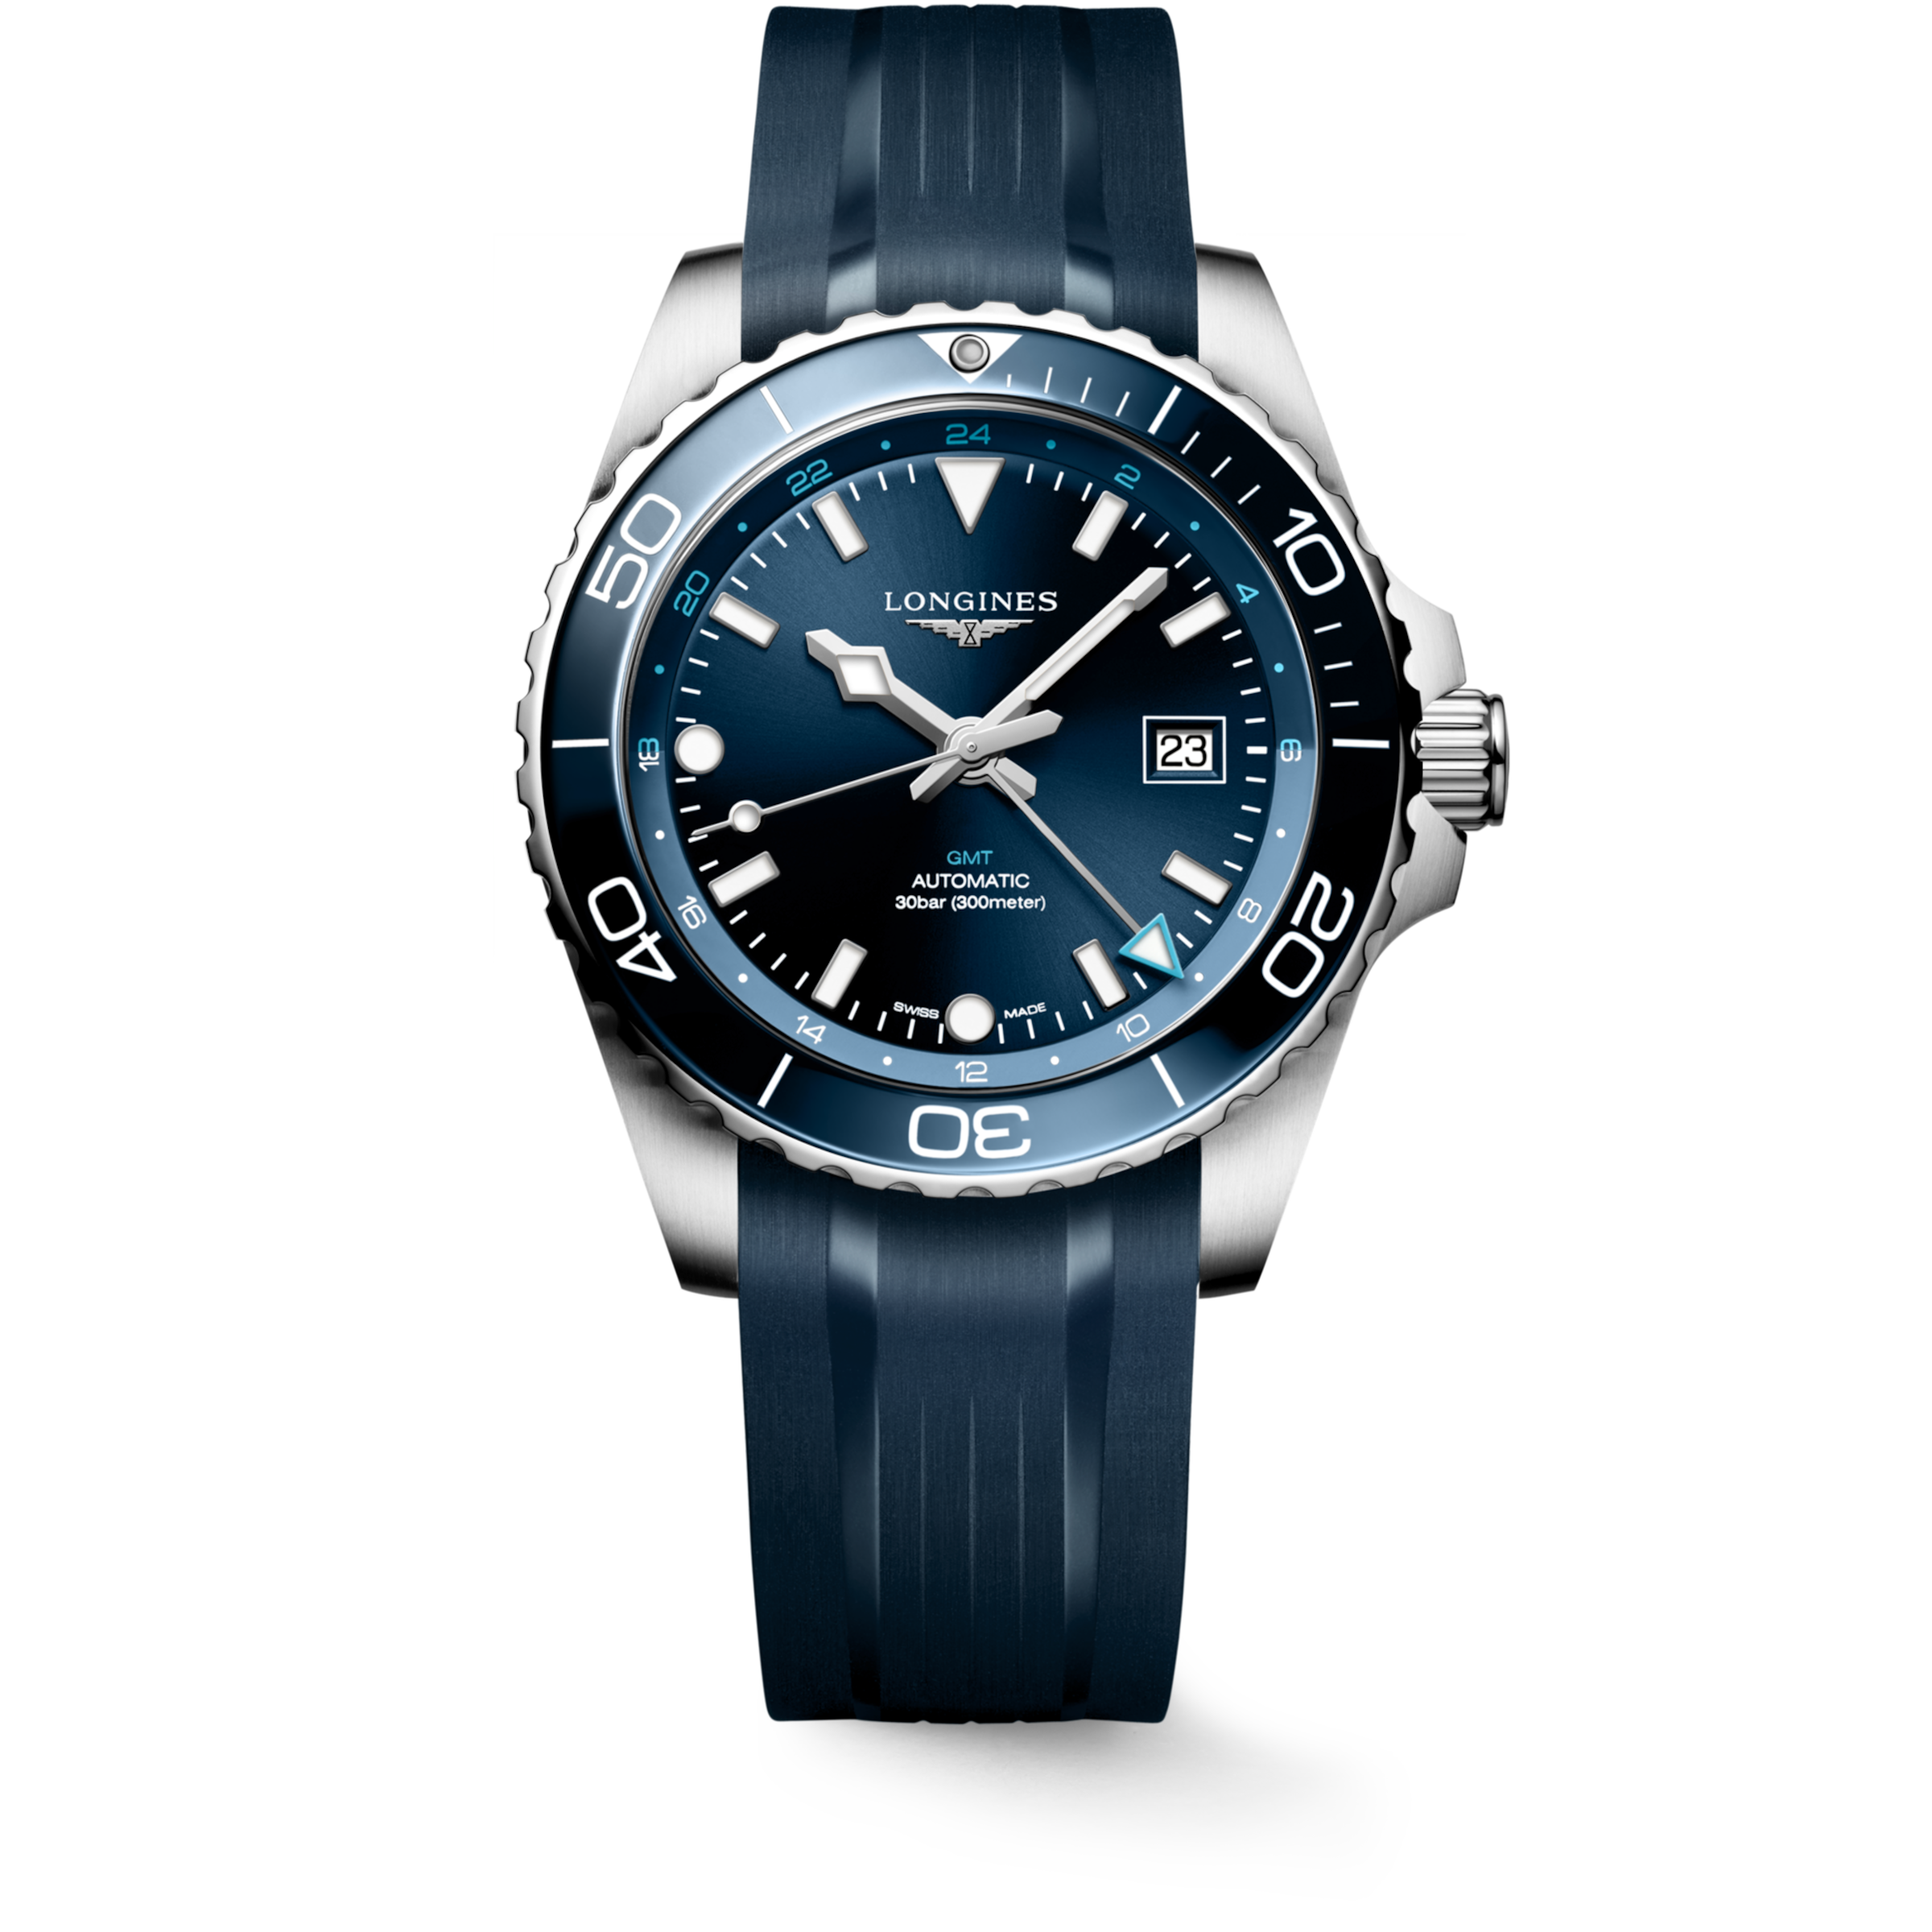 Longines HYDROCONQUEST Automatic Stainless steel and ceramic bezel Watch - L3.890.4.96.9